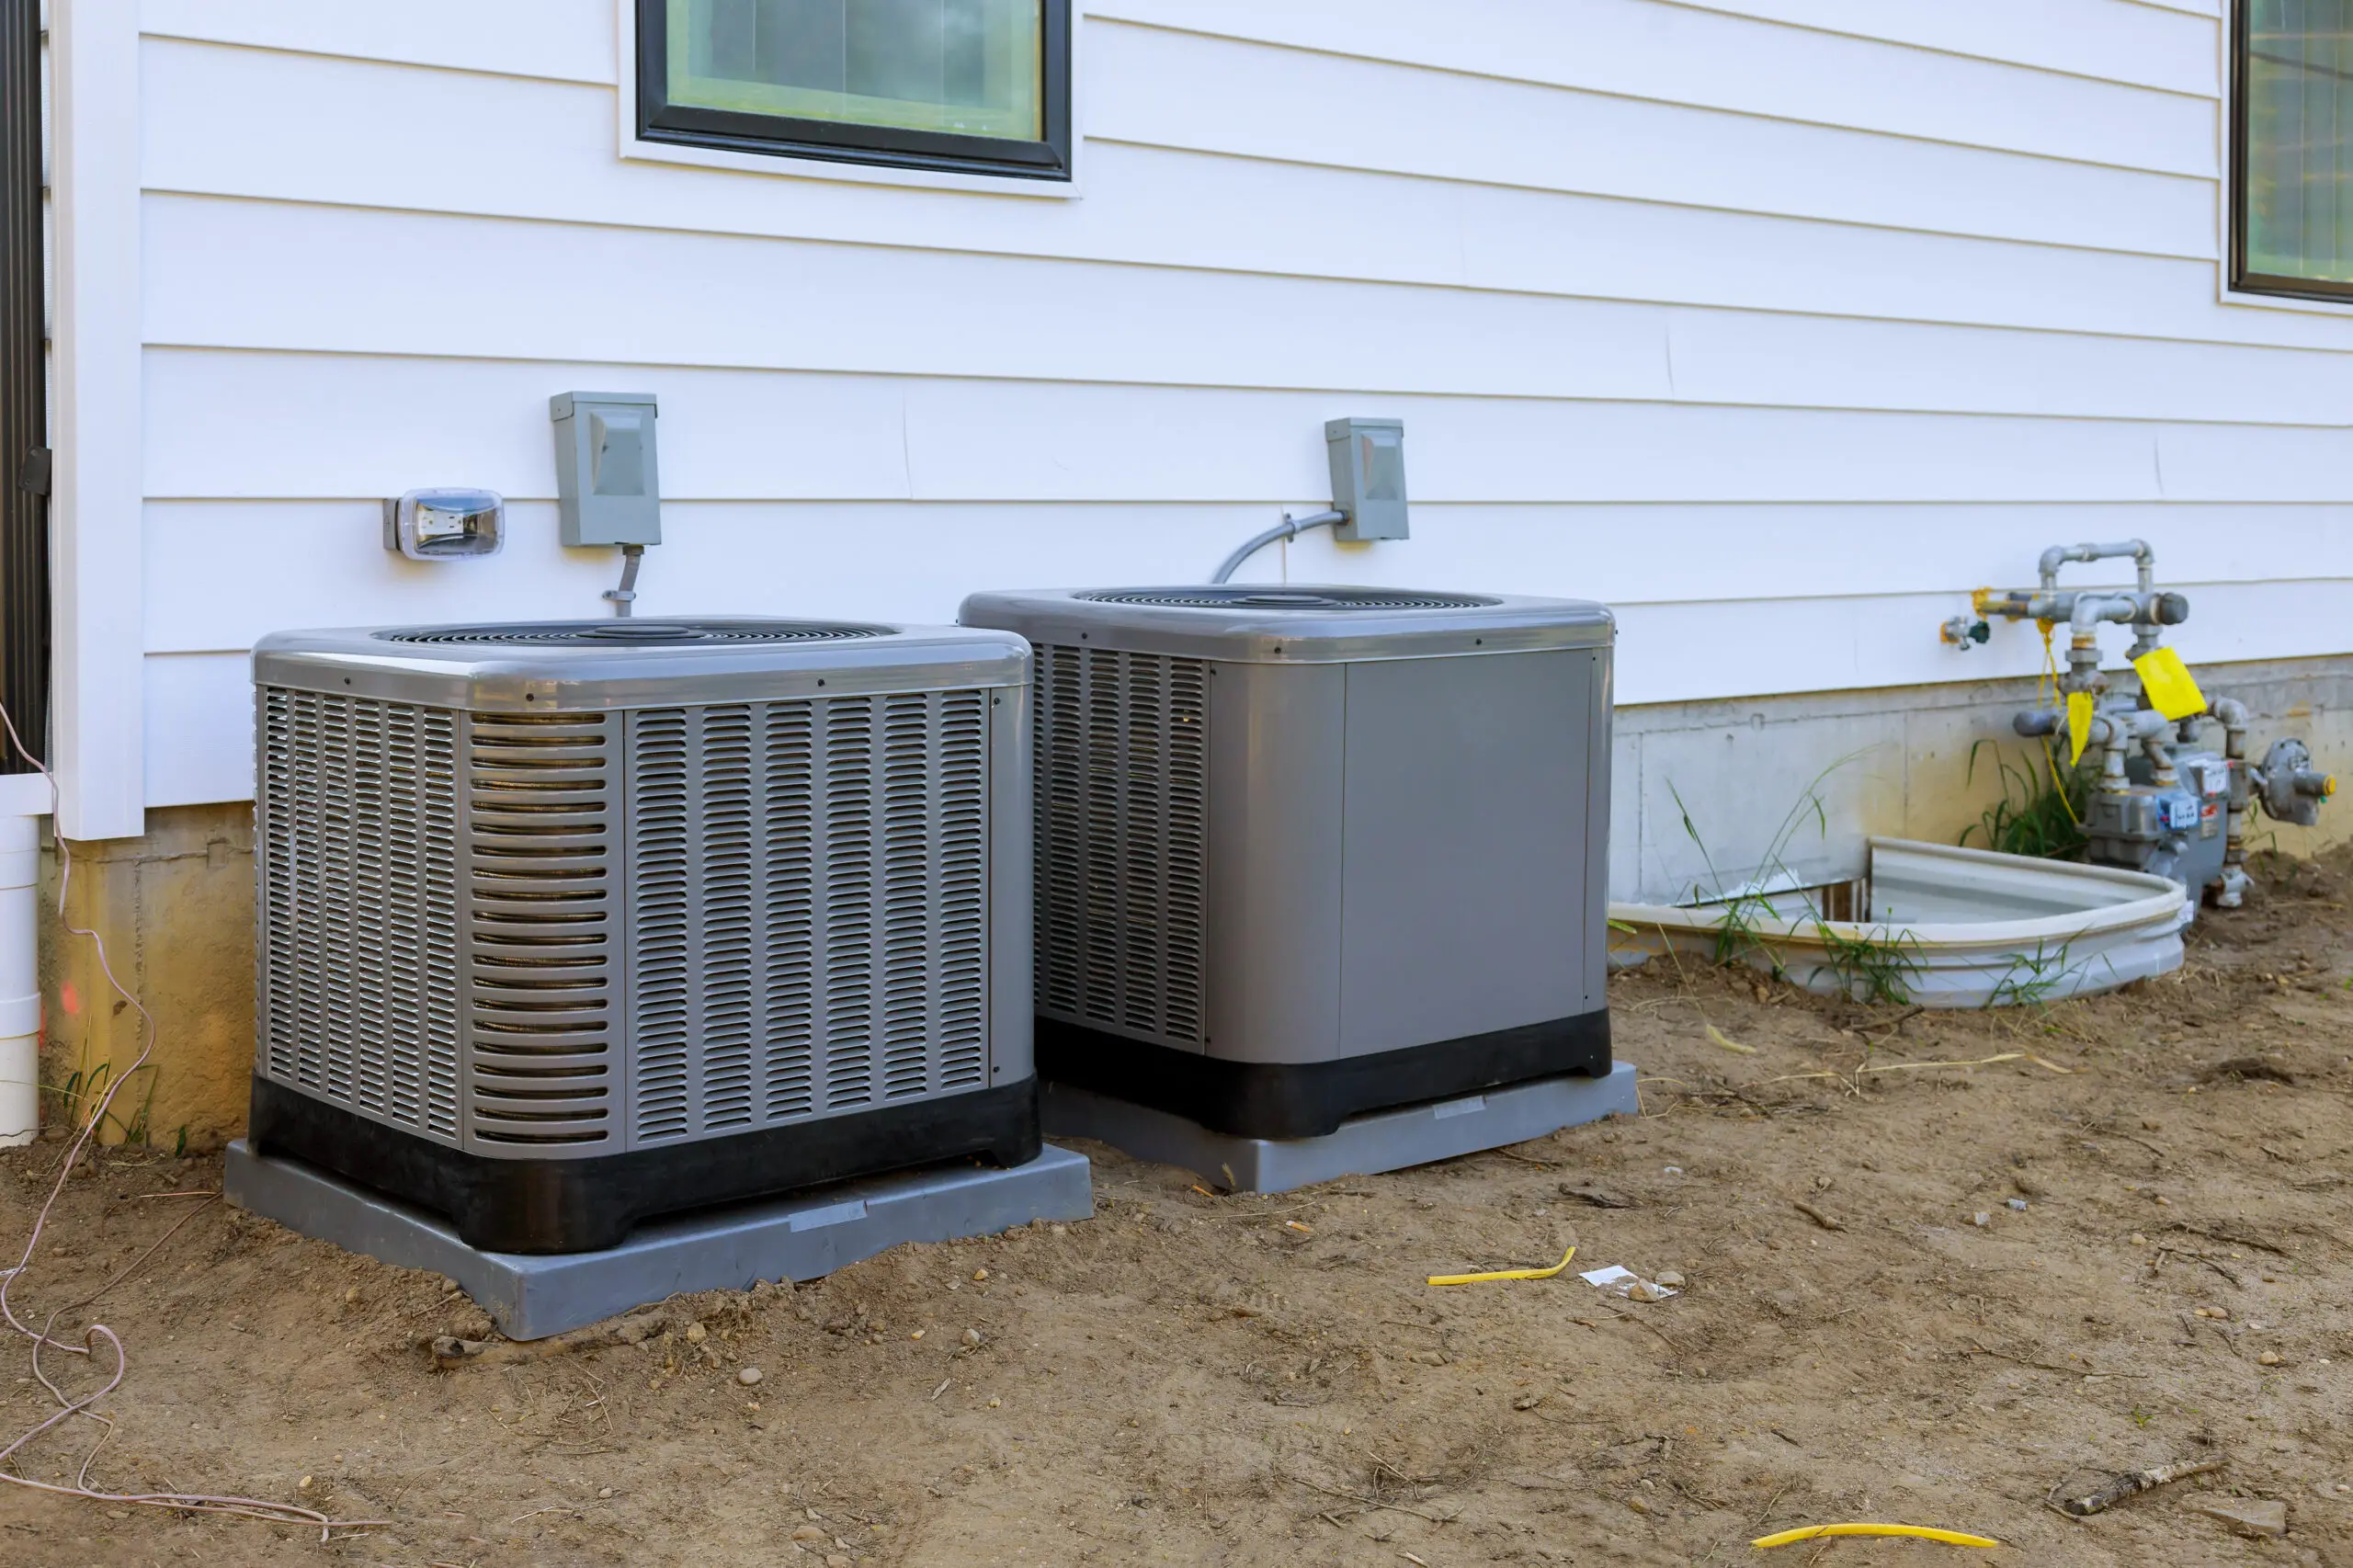 Air conditioning system unit installed outside facade of the new house